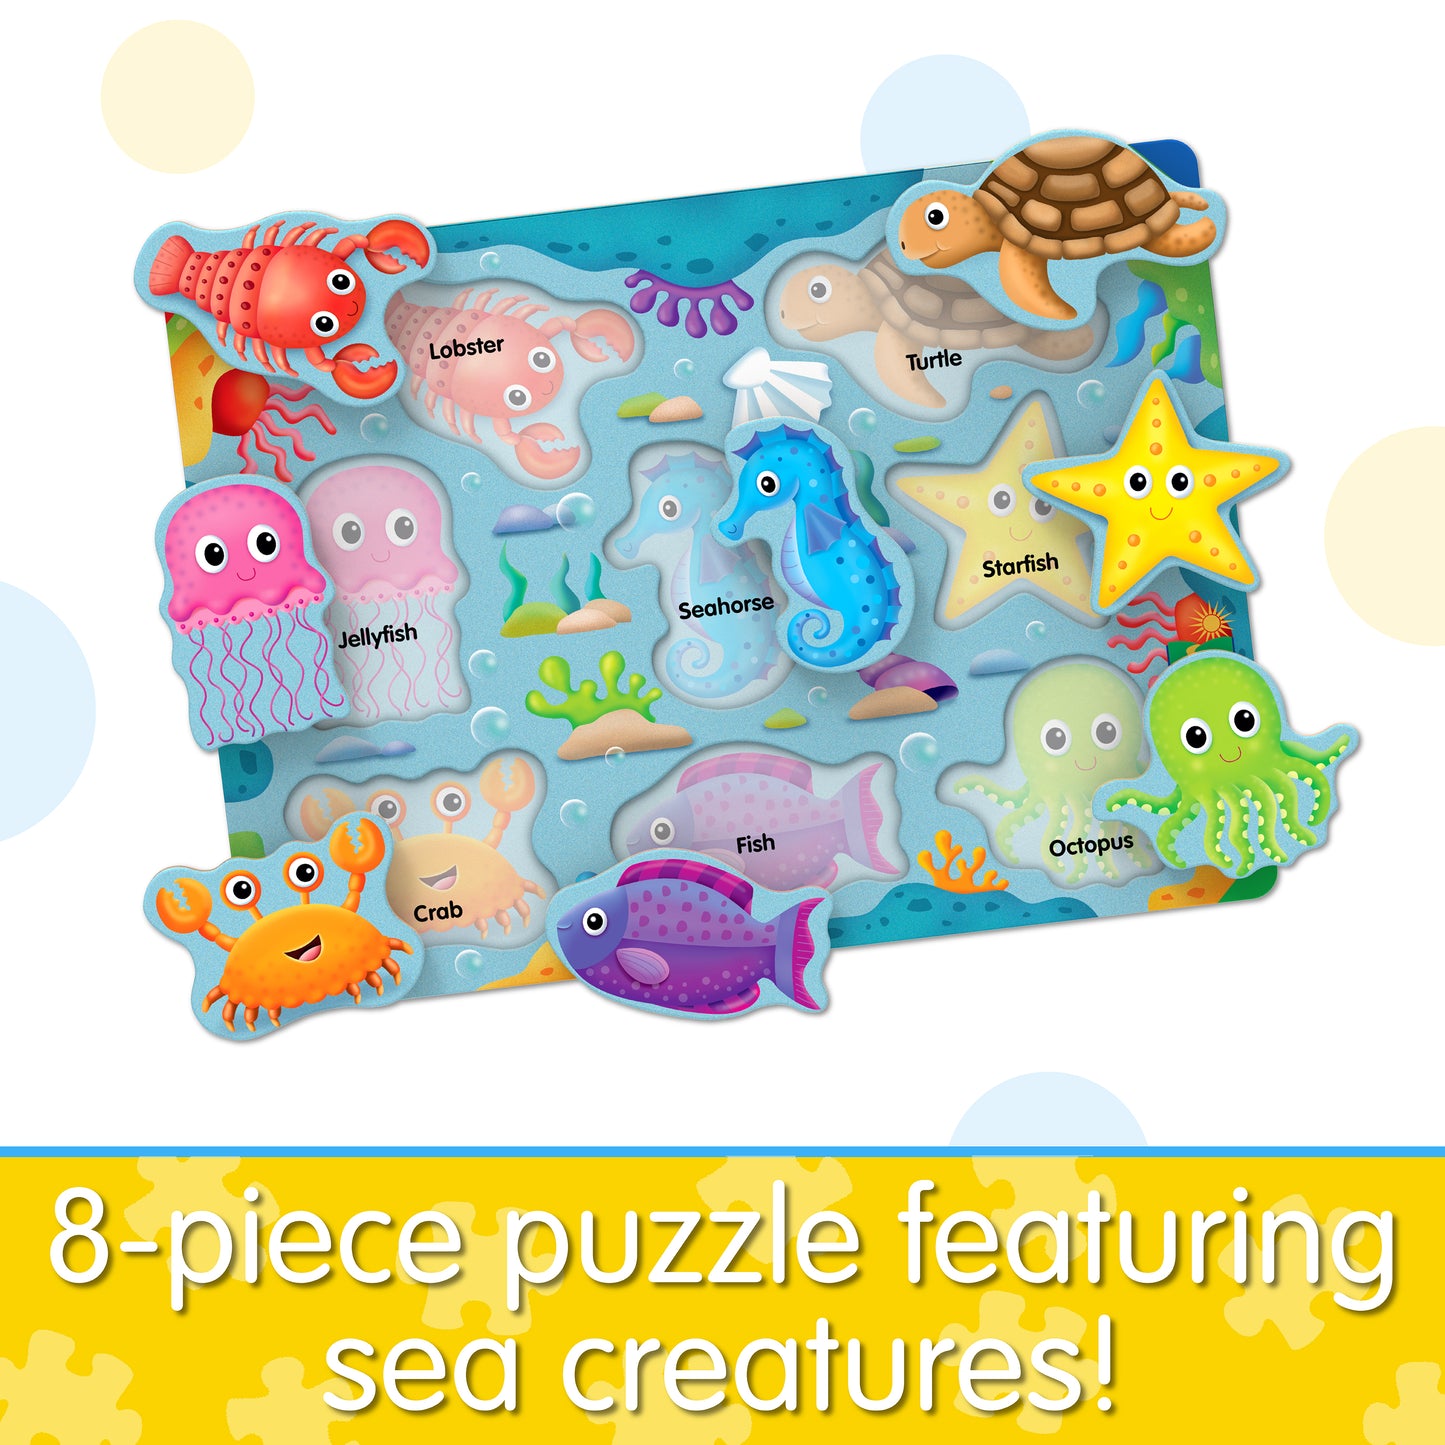 Infographic about My First Lift and Learn Under the Sea Puzzle that says, "8-piece puzzle featuring sea creatures!"